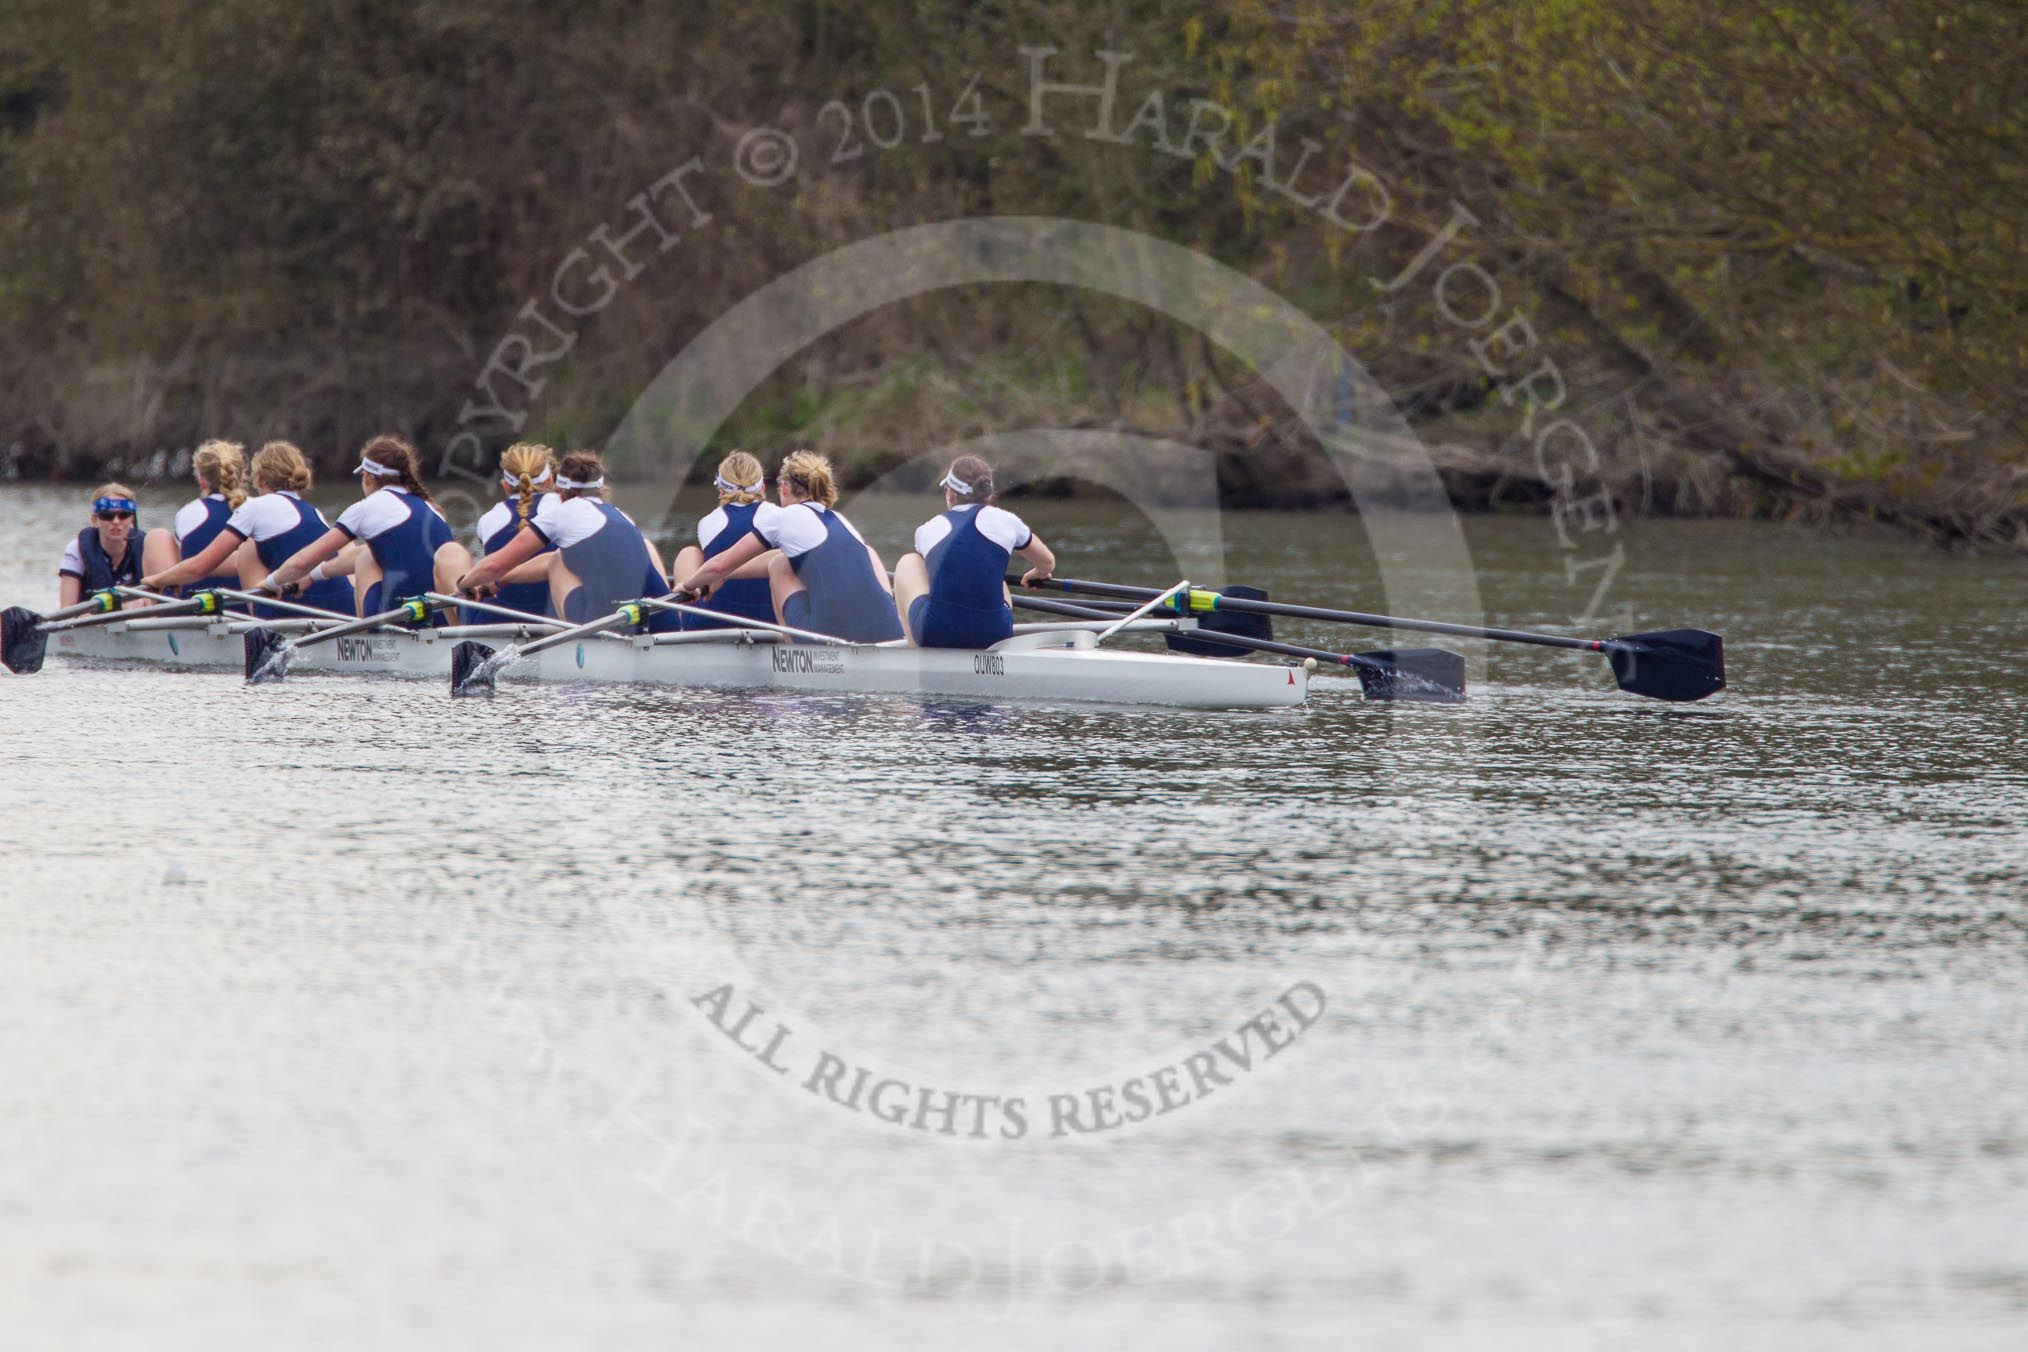 The Women's Boat Race and Henley Boat Races 2014: The Newton Women's Boat Race: Oxford is leading, here approaching Fawley Court..
River Thames,
Henley-on-Thames,
Buckinghamshire,
United Kingdom,
on 30 March 2014 at 15:14, image #289